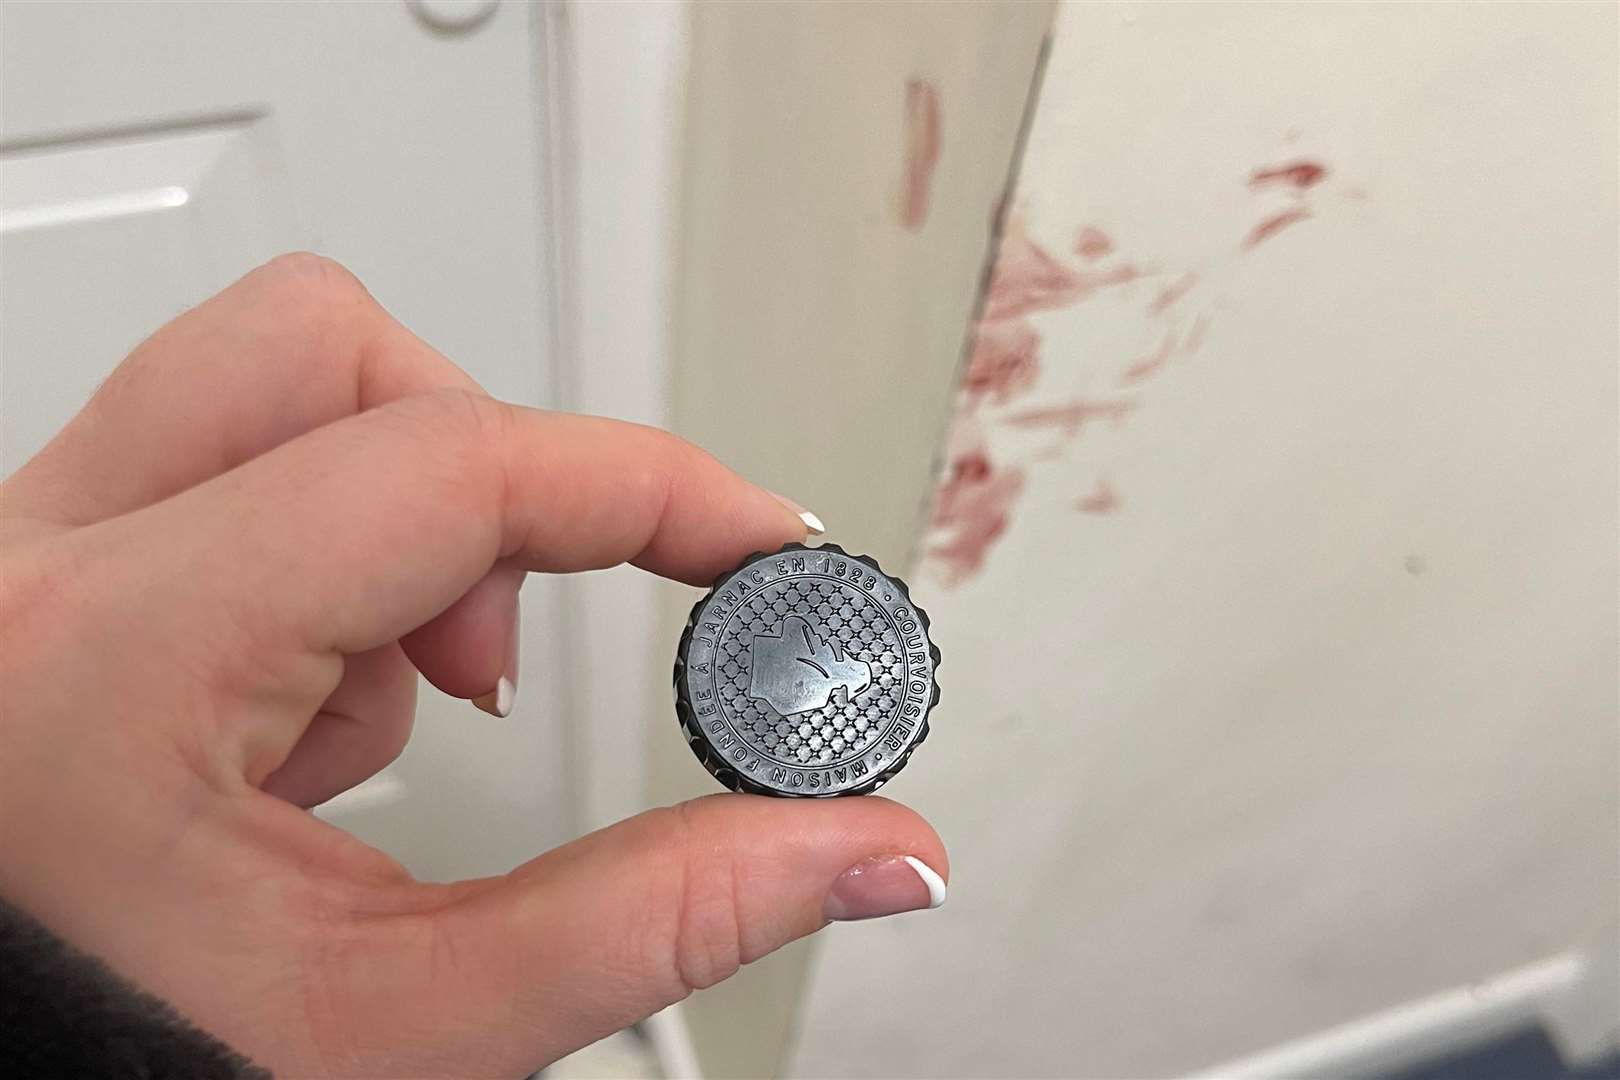 A lid from a bottle of alcohol left by the man who attempted to get into Rachael's flat